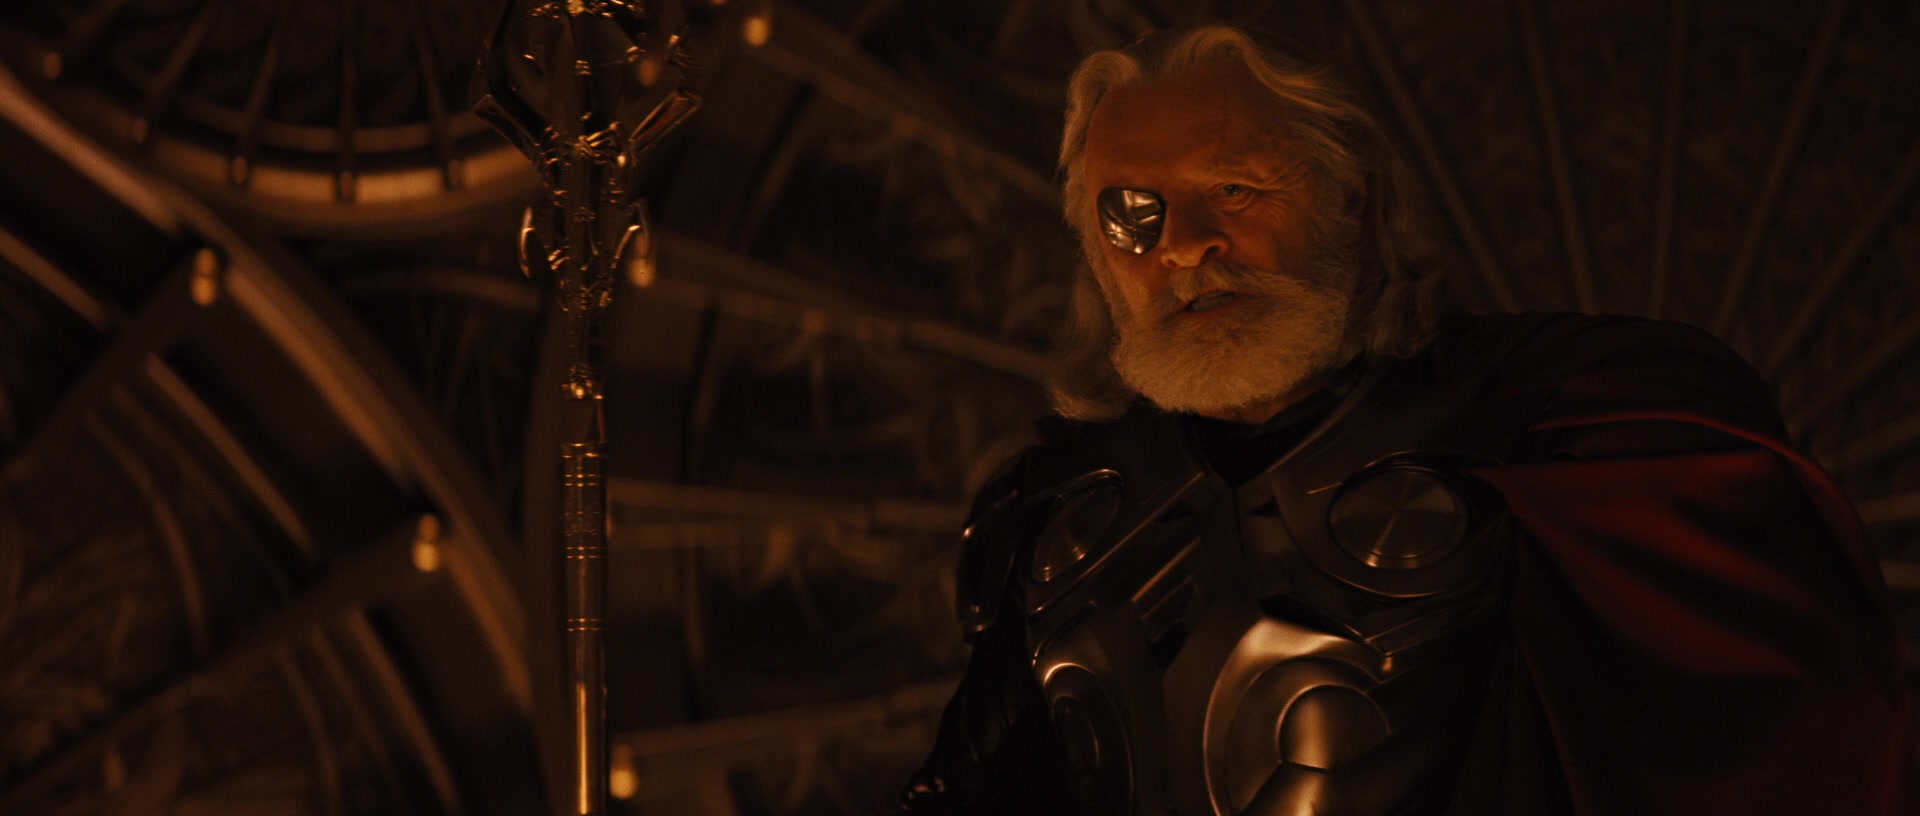 Odin (Anthony Hopkins) casts Thor (Chris Hemsworth) out of Asgard in Thor (2011), Marvel Entertainment